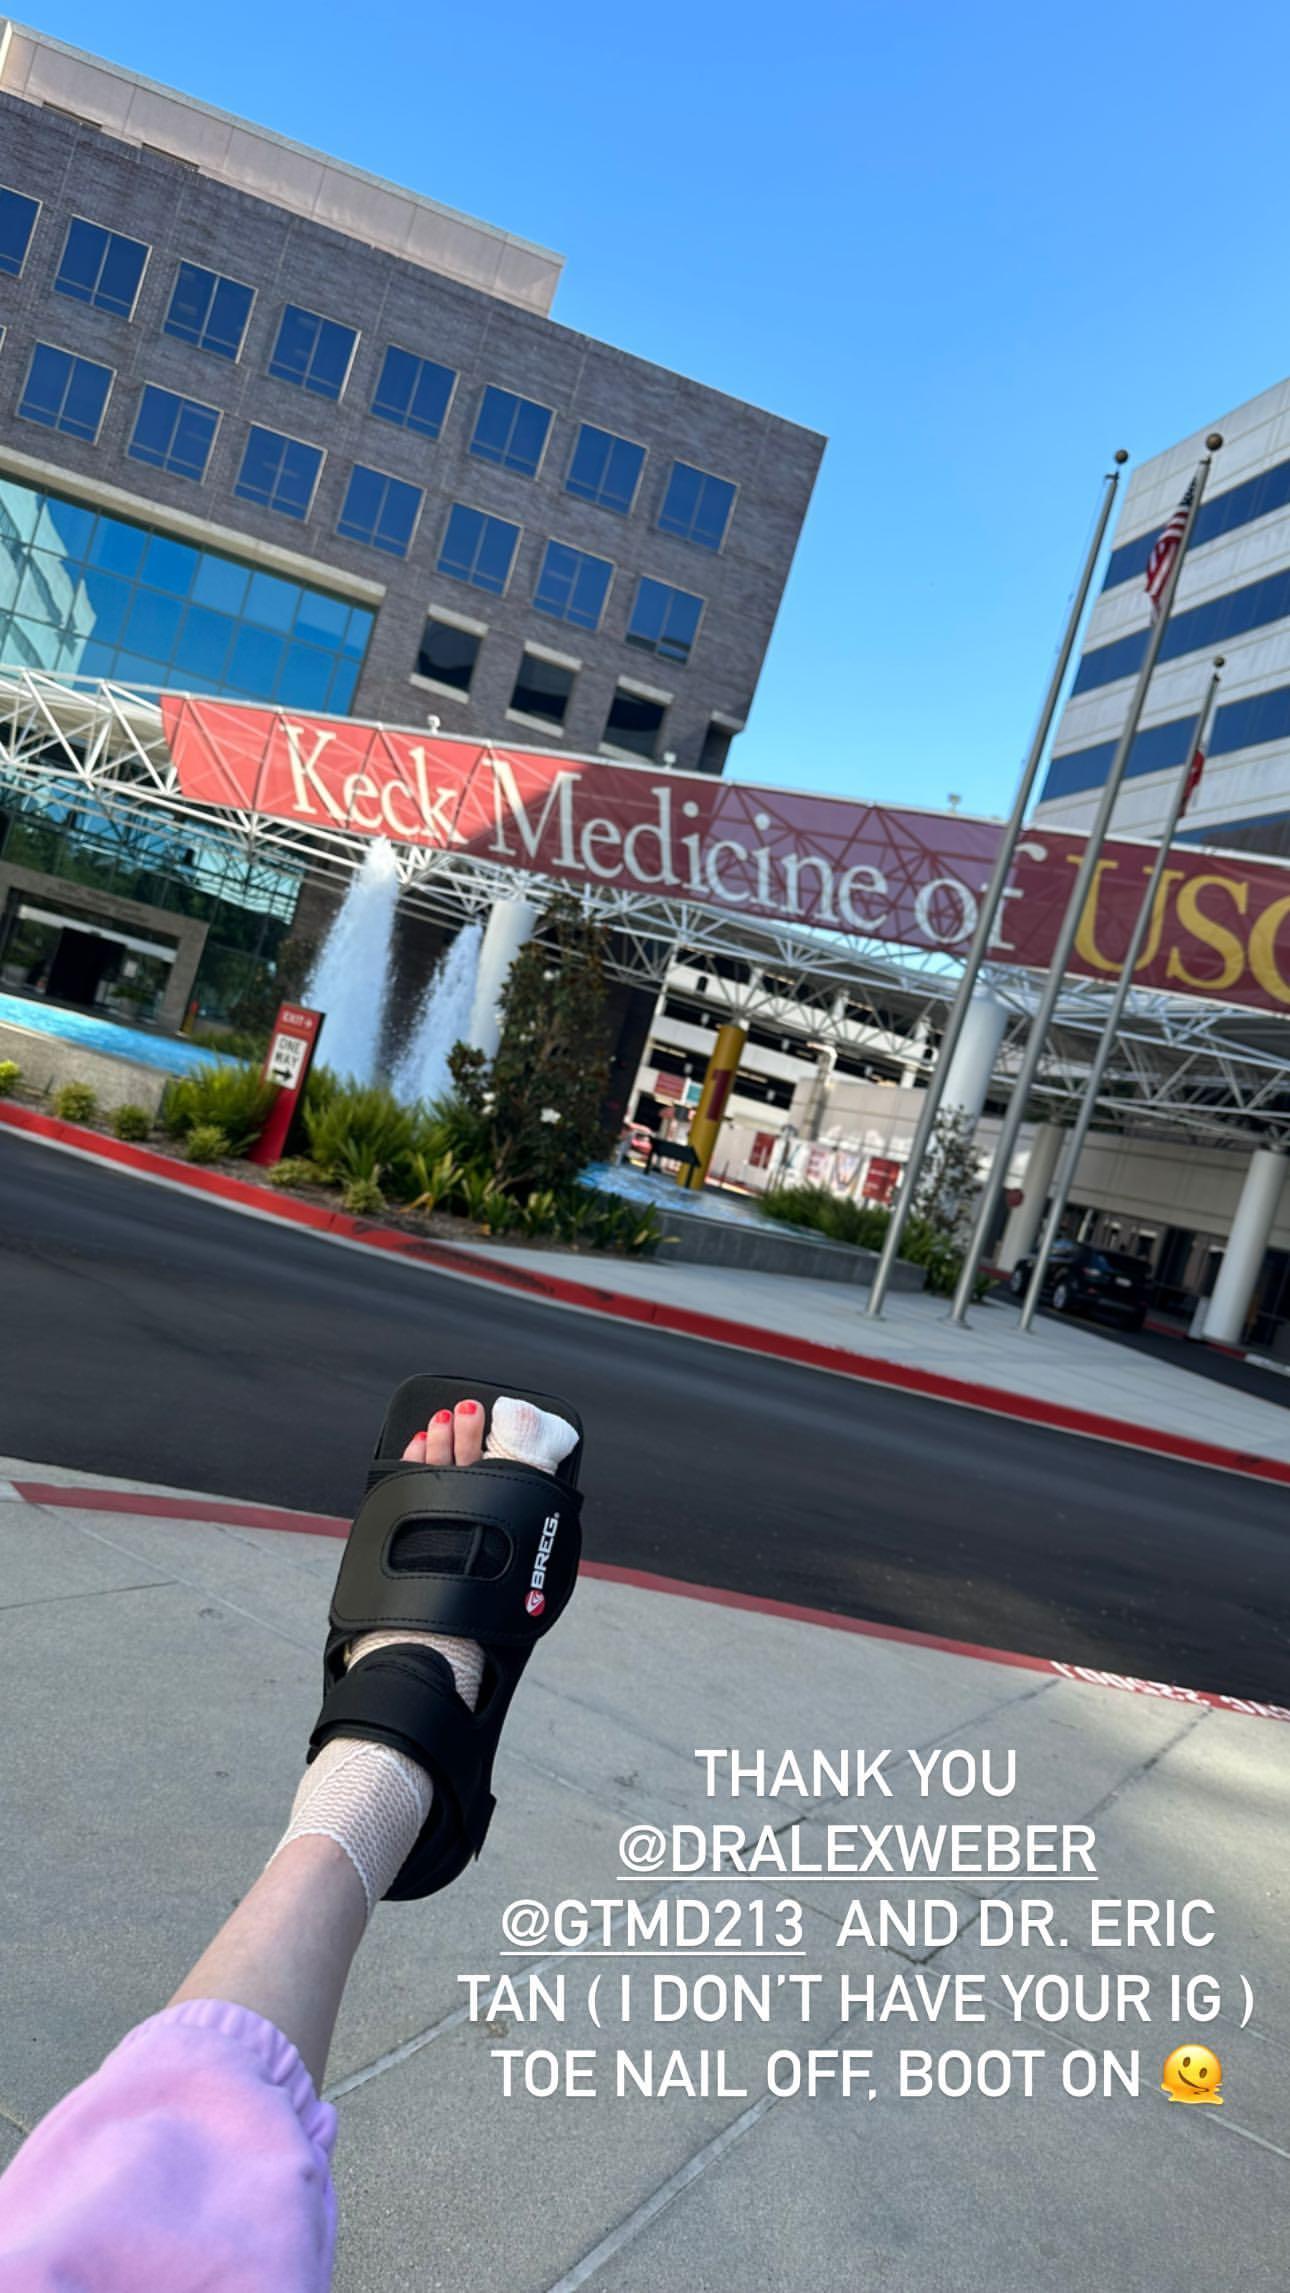 Erika Jayne Reveals Gruesome Bloody Toe In Versace Heels After Nasty Spill At Soho House